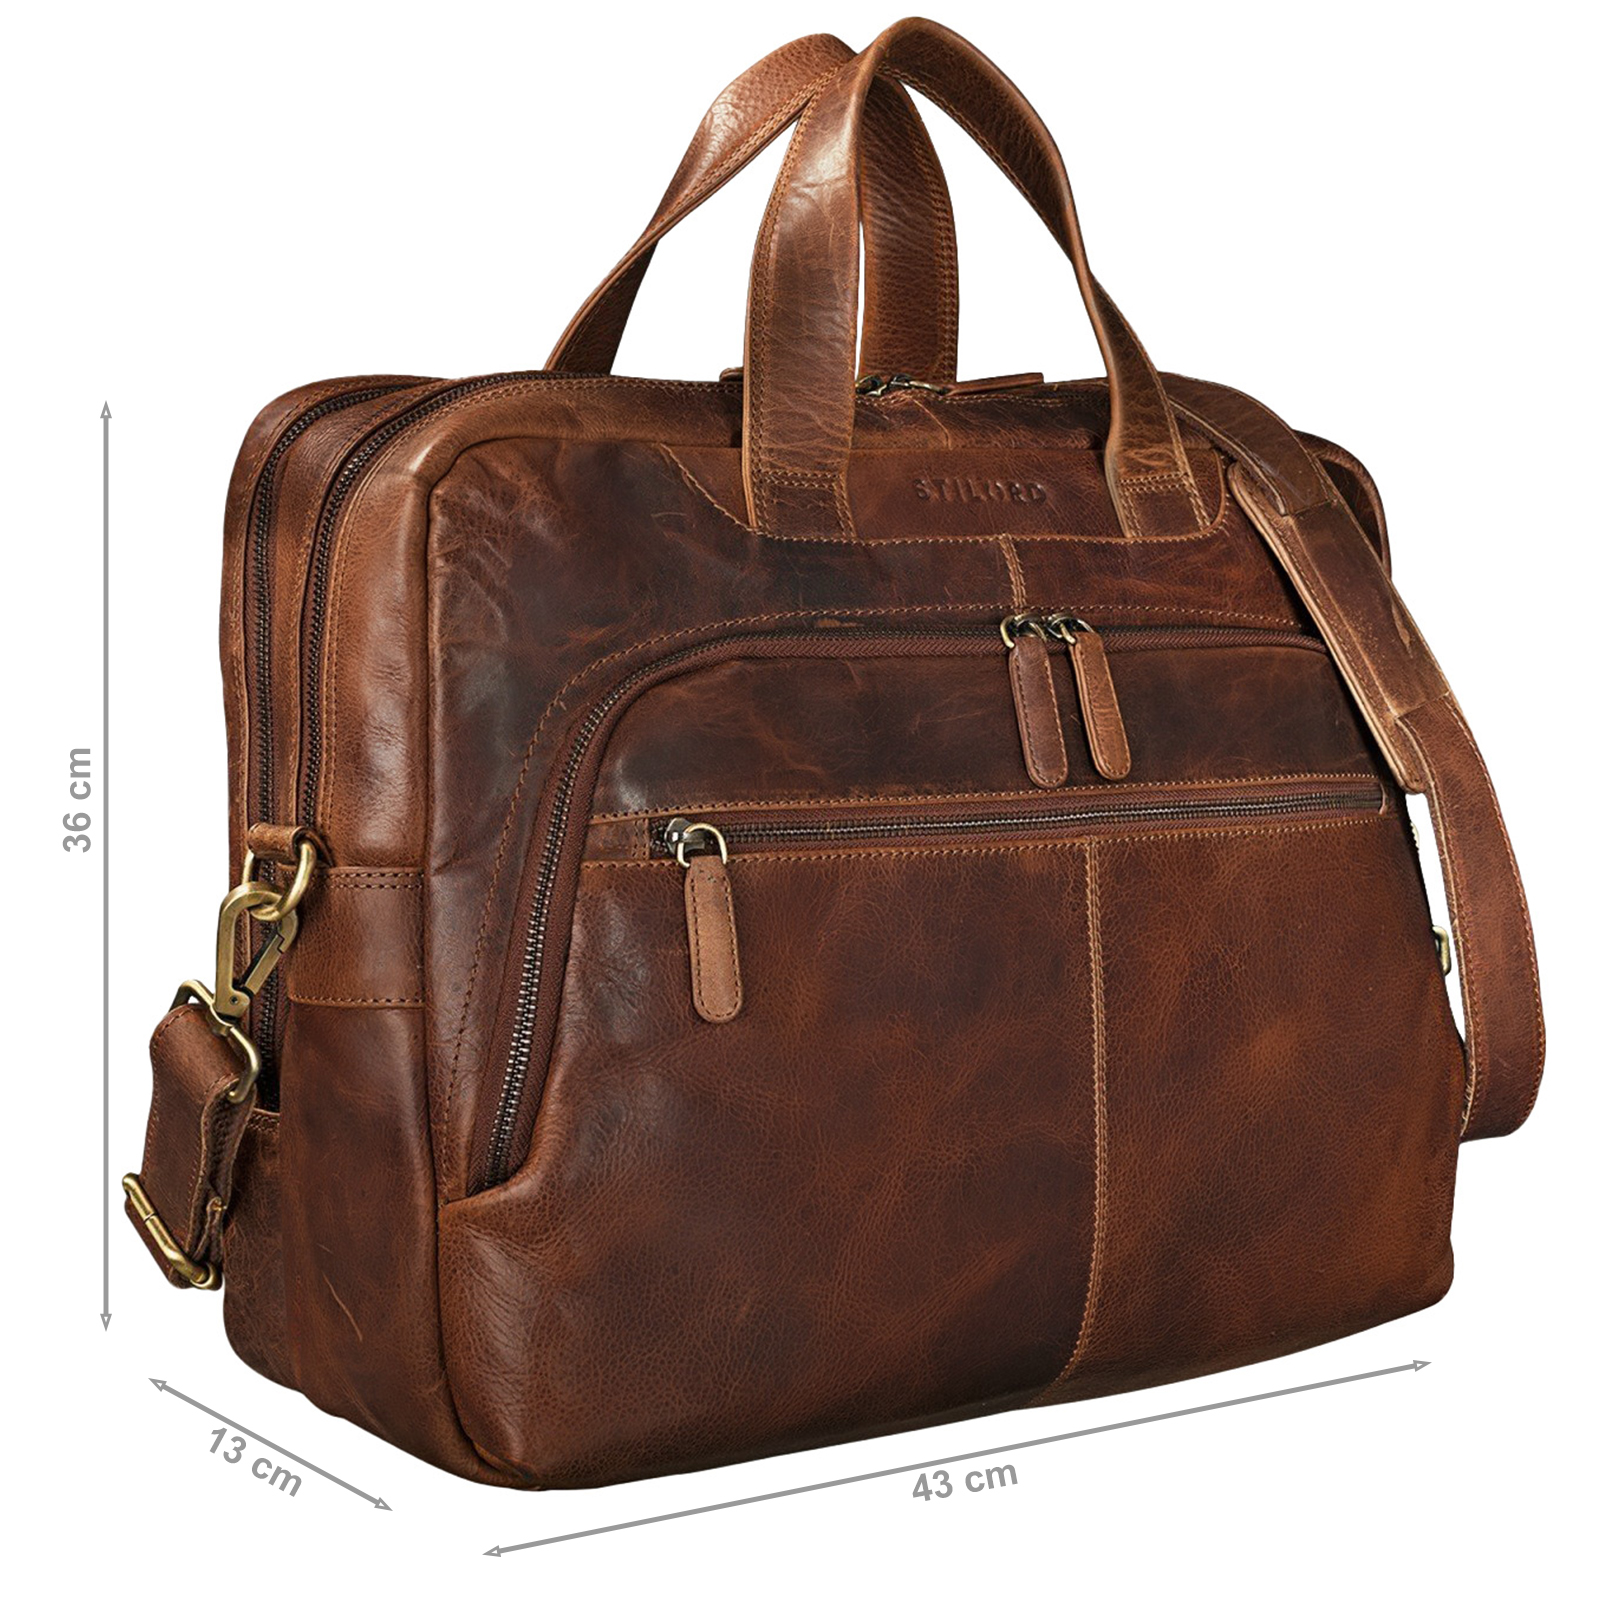 black.brown.marrom Leather Executive Office Bag